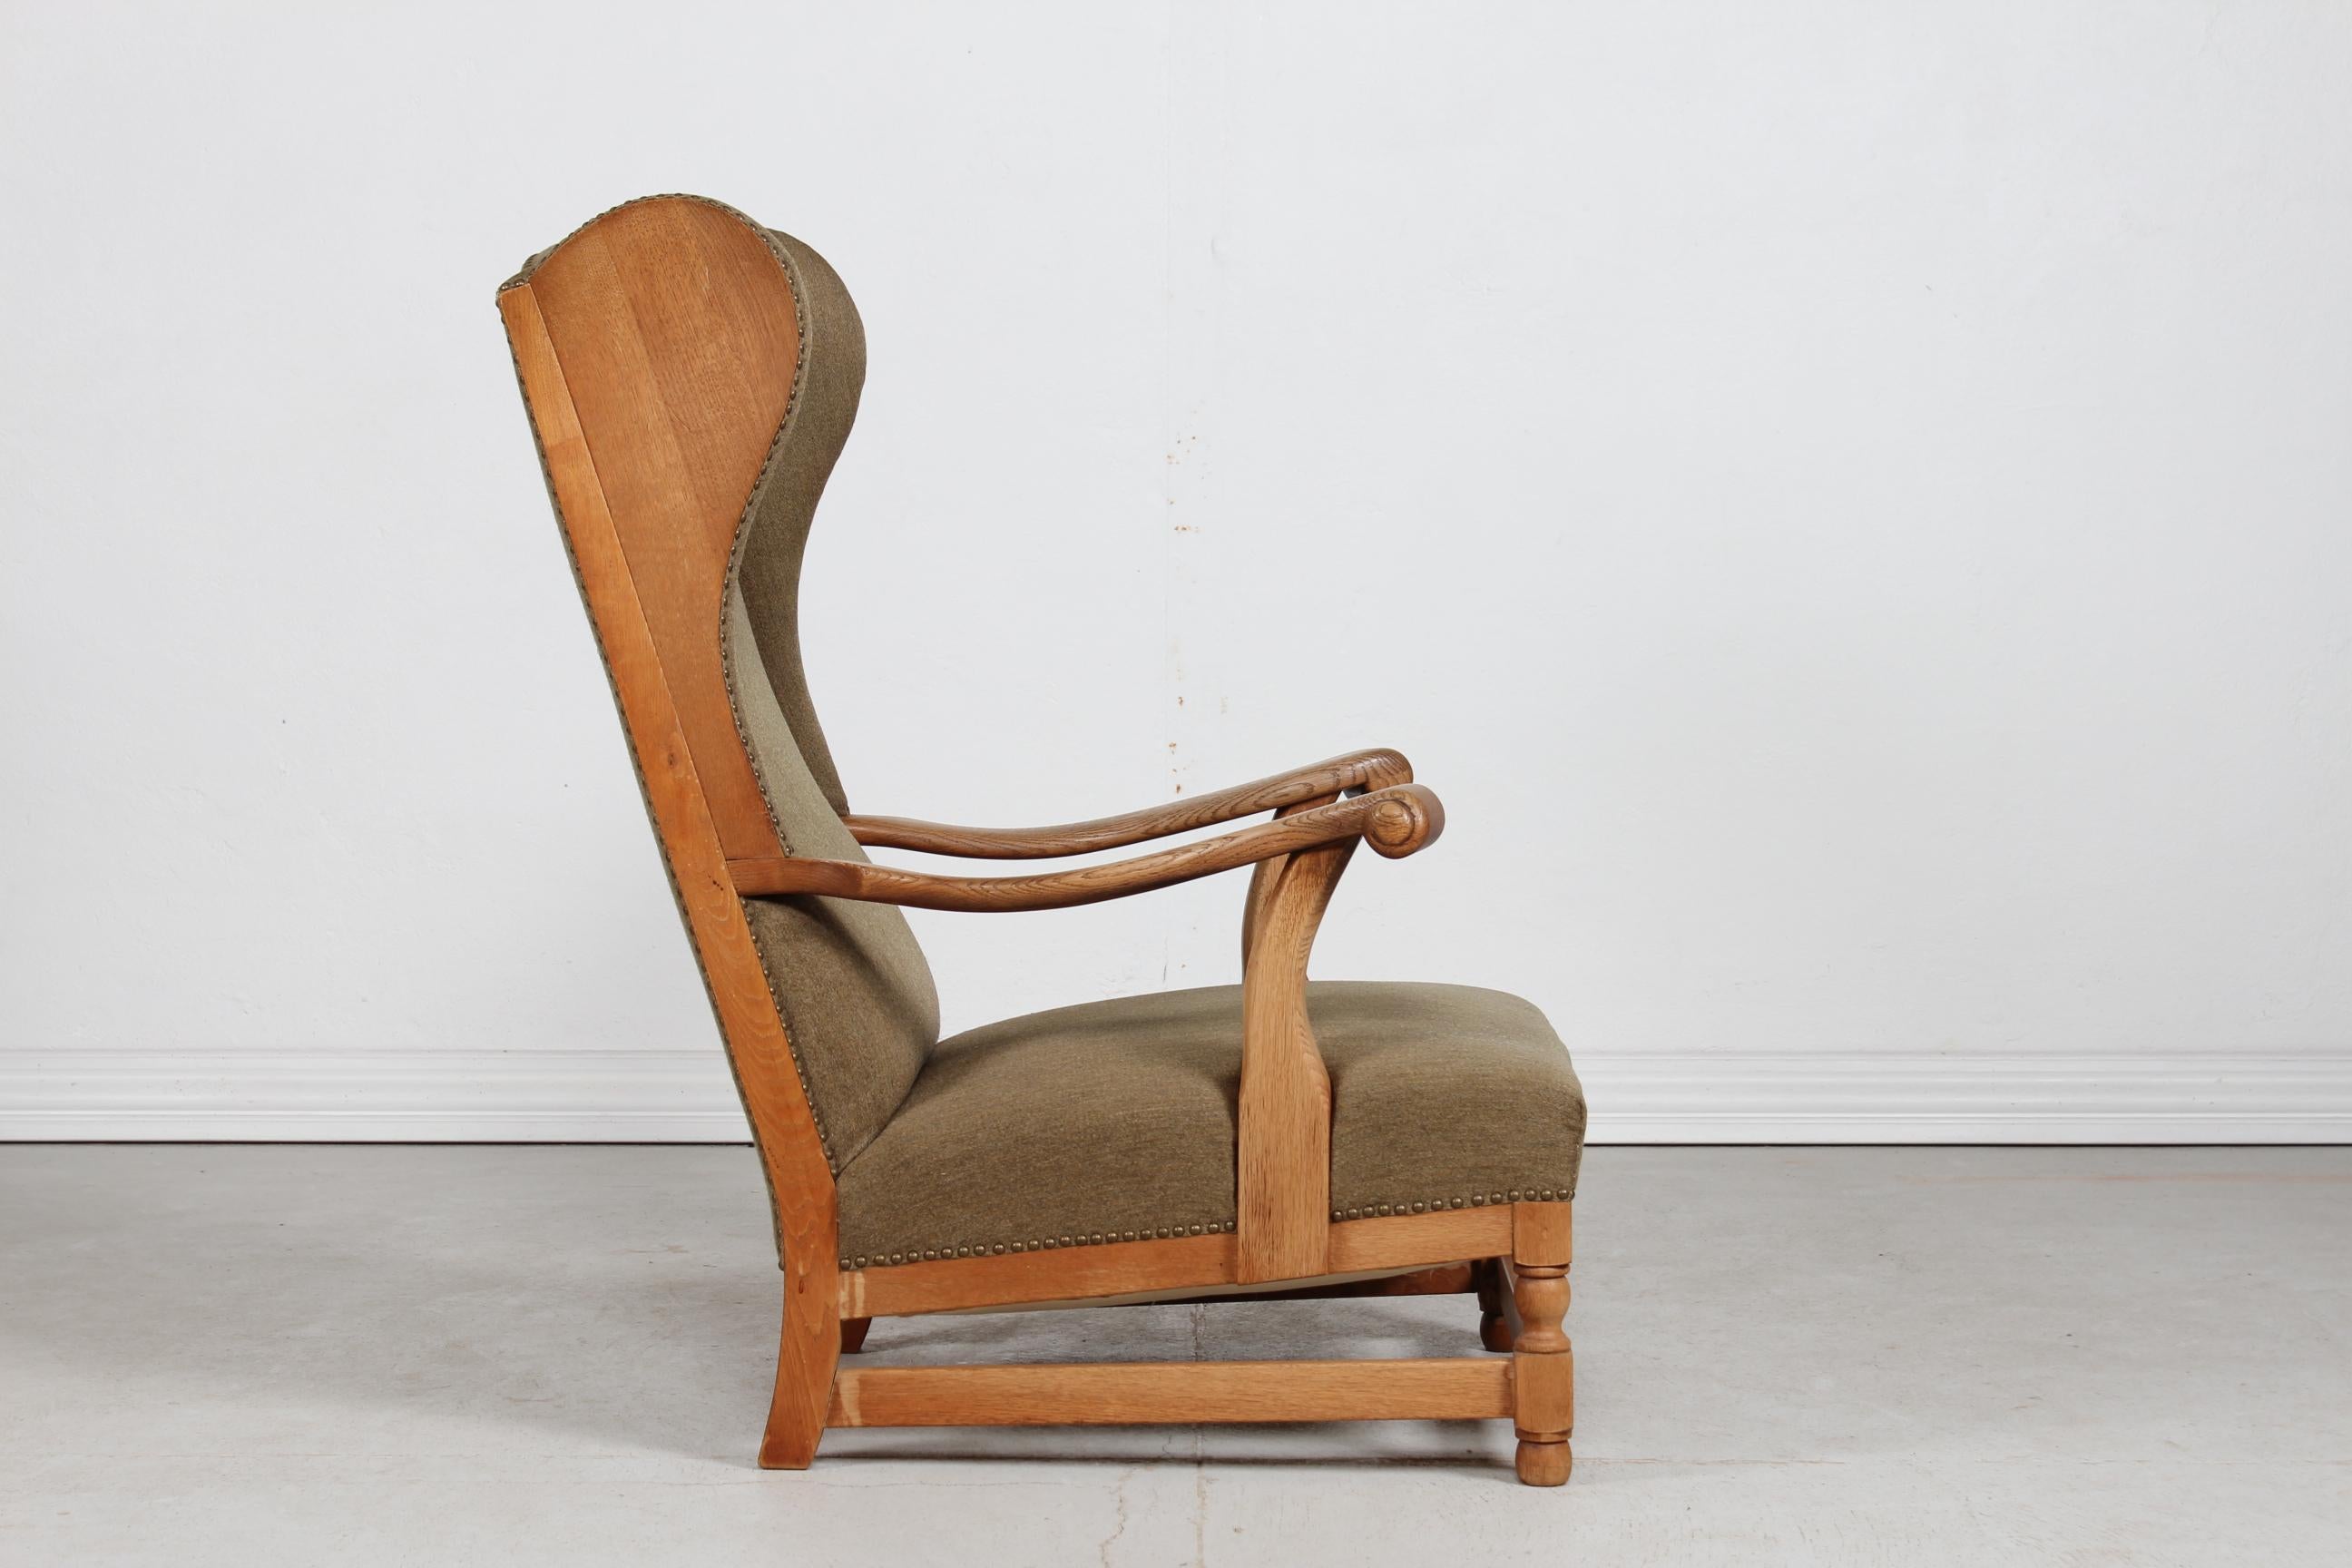 Stunning danish baroque style high-backed ear-flap chair hand made in the 1930s

The frame and armrests are made beautifully of turned and carved solid oak. Especially the armrests has a spectacular curved snakelike shape. 

The old upholstery is